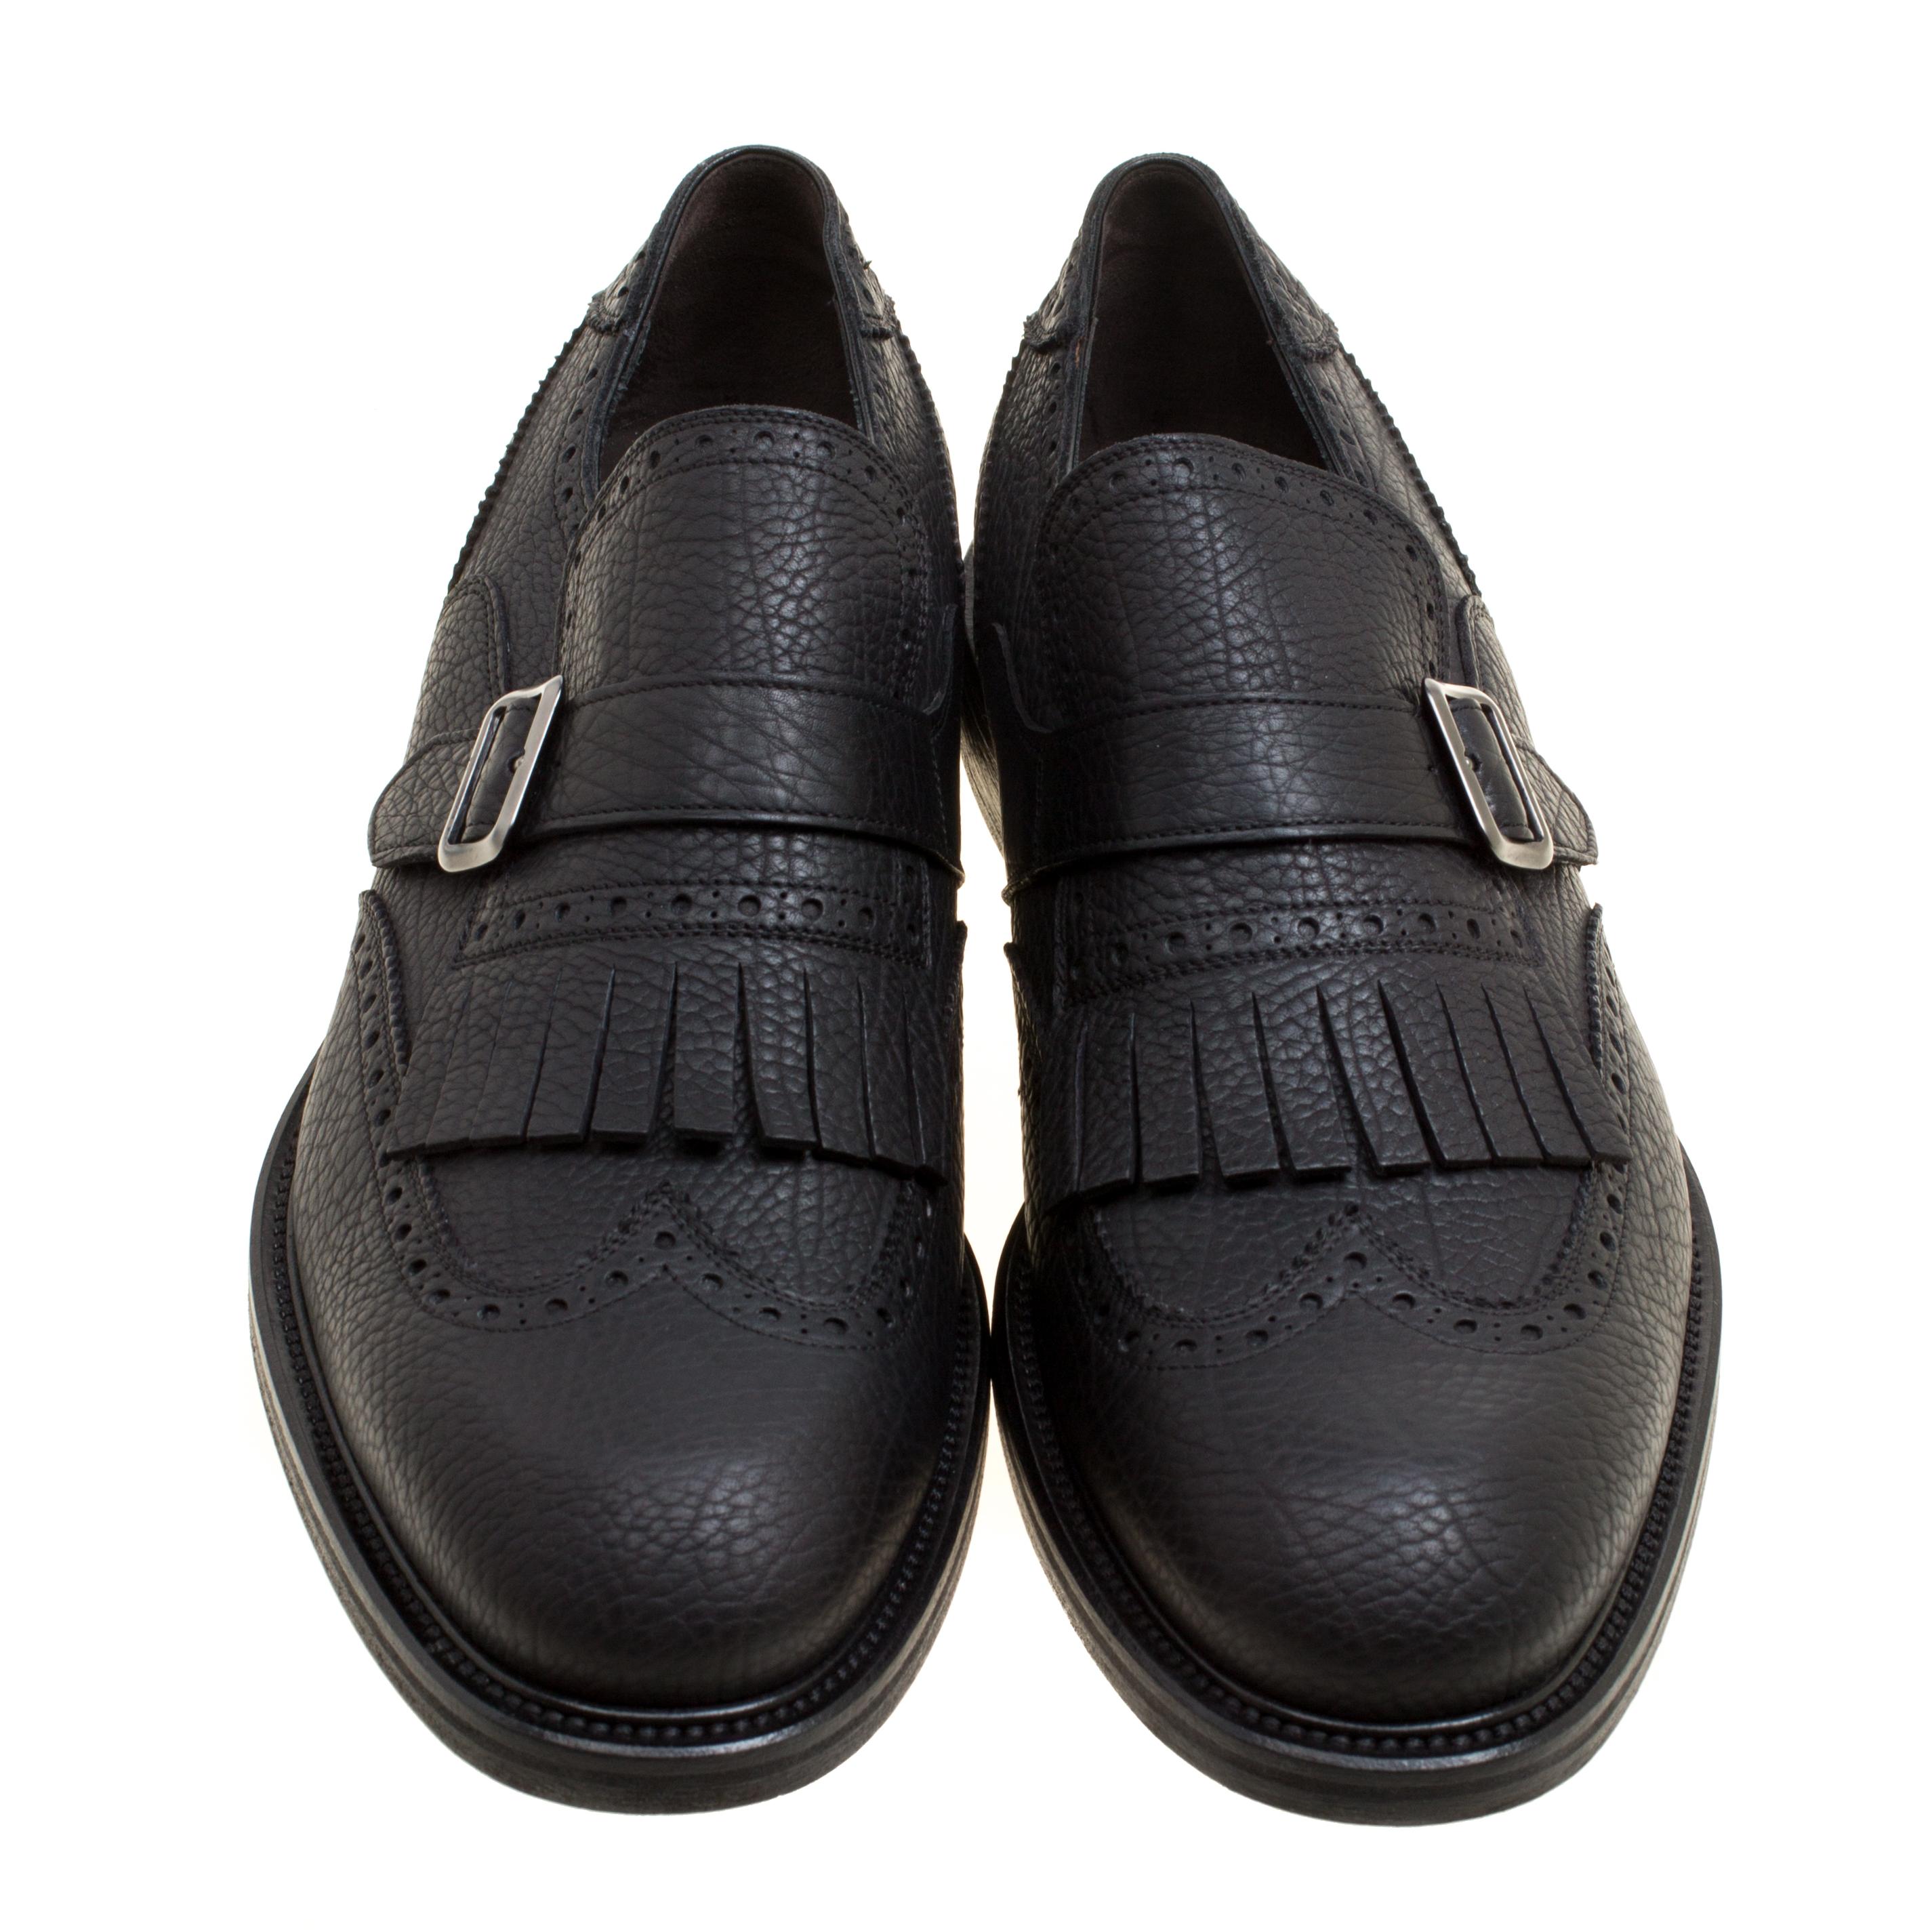 Take each step with style in these loafers from Salvatore Ferragamo. Crafted from leather, they carry a modern design of belts, wingtips, and fringes, in a timeless black shade with every stitch on them giving praise to quality and durability. The